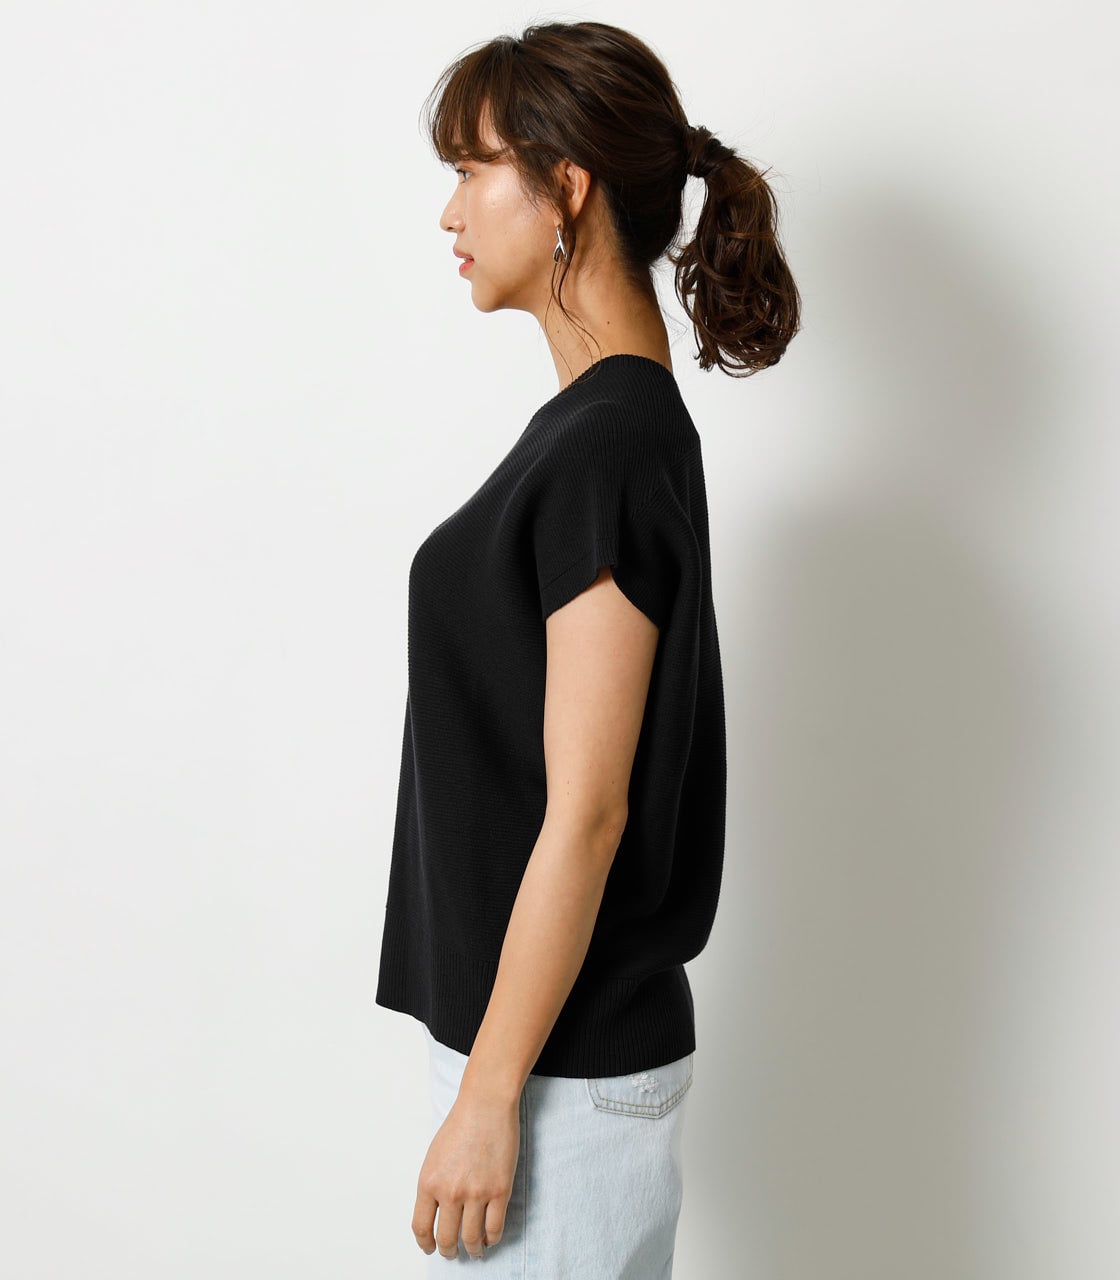 LOOSE PANEL KNIT TOP/ルーズパネルニットトップ 詳細画像 BLK 5